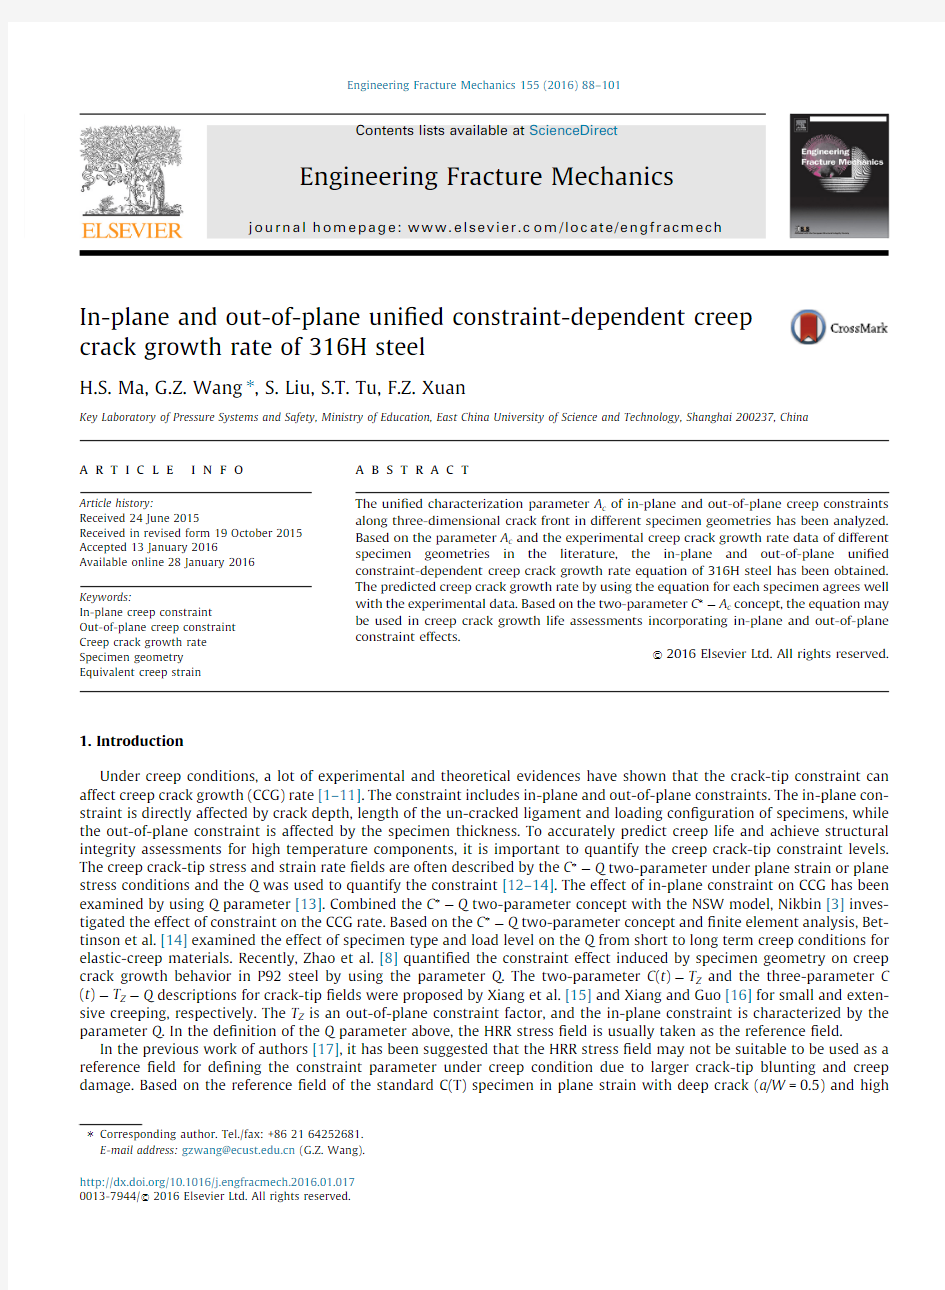 In-plane and out-of-plane unified constraint-dependent creep crack growth rate of 316H steel